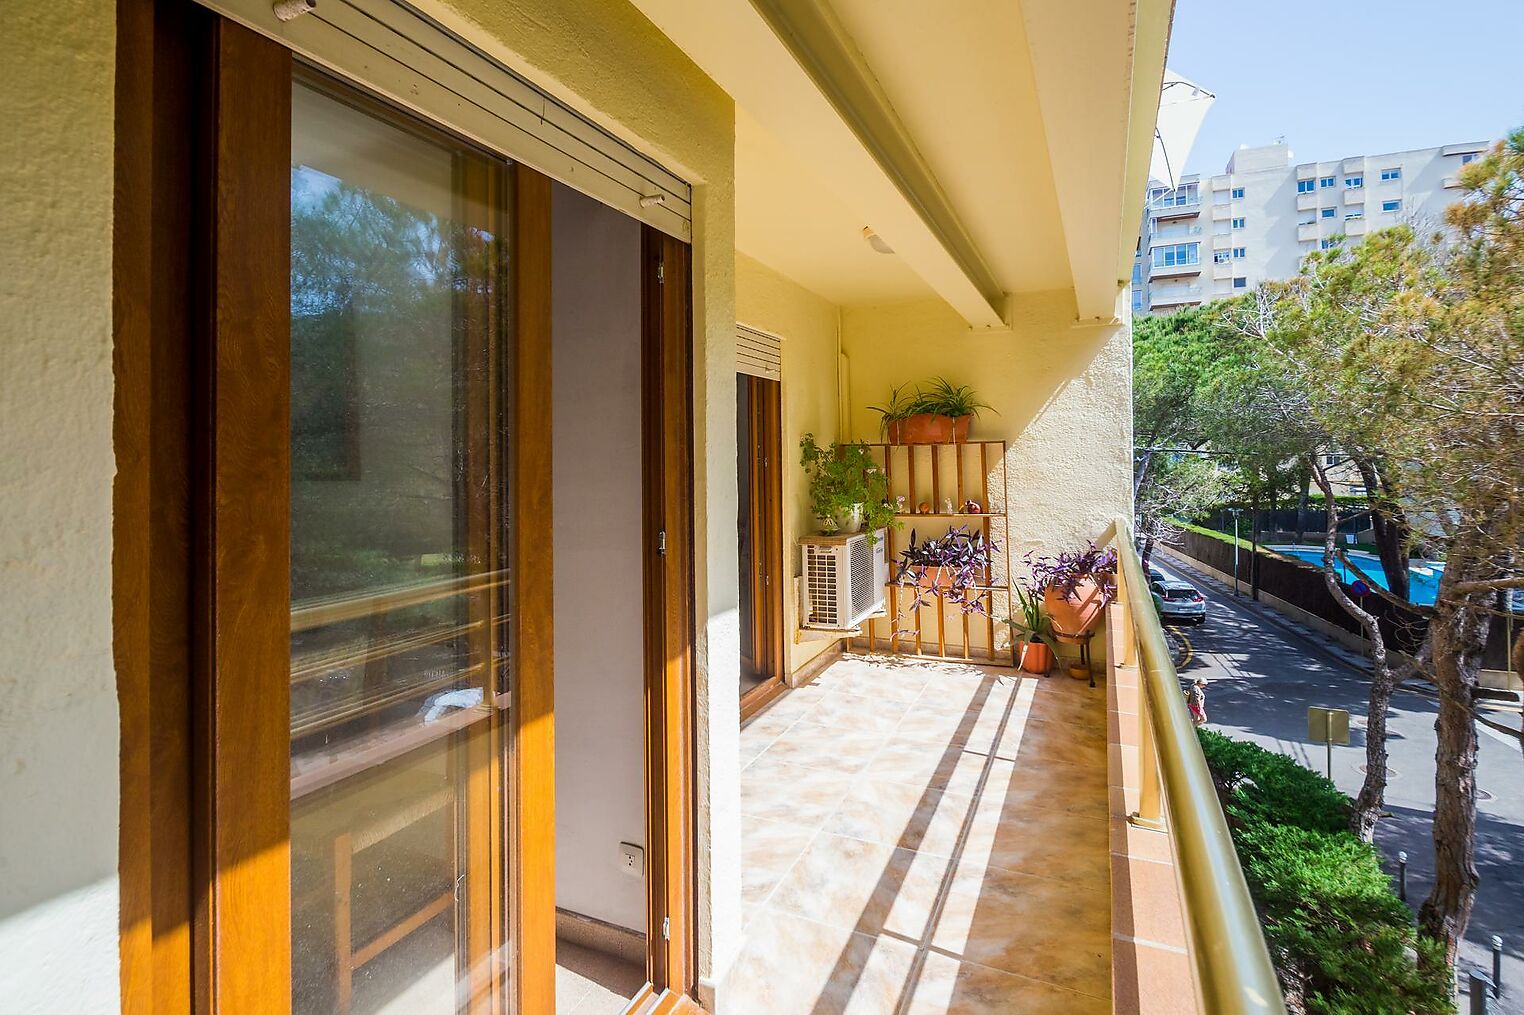 Apartment close to the beach in Platja d'Aro